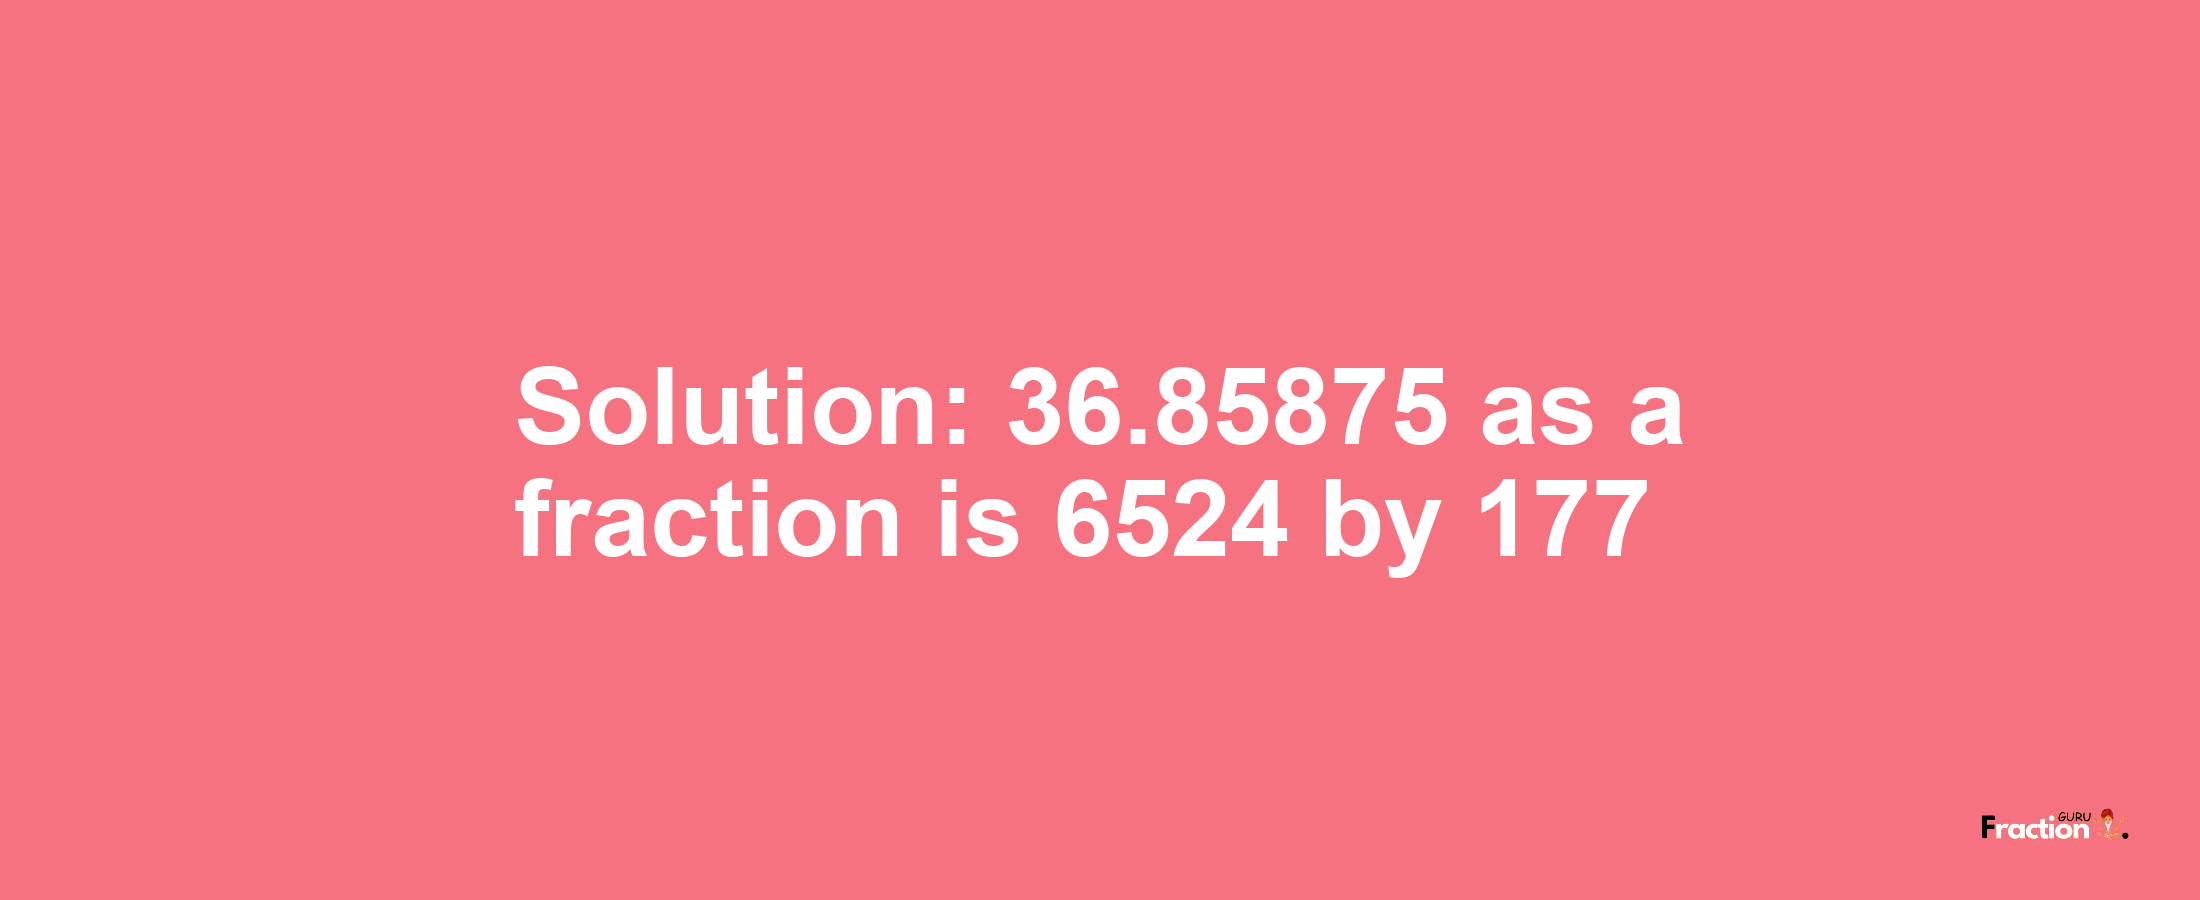 Solution:36.85875 as a fraction is 6524/177